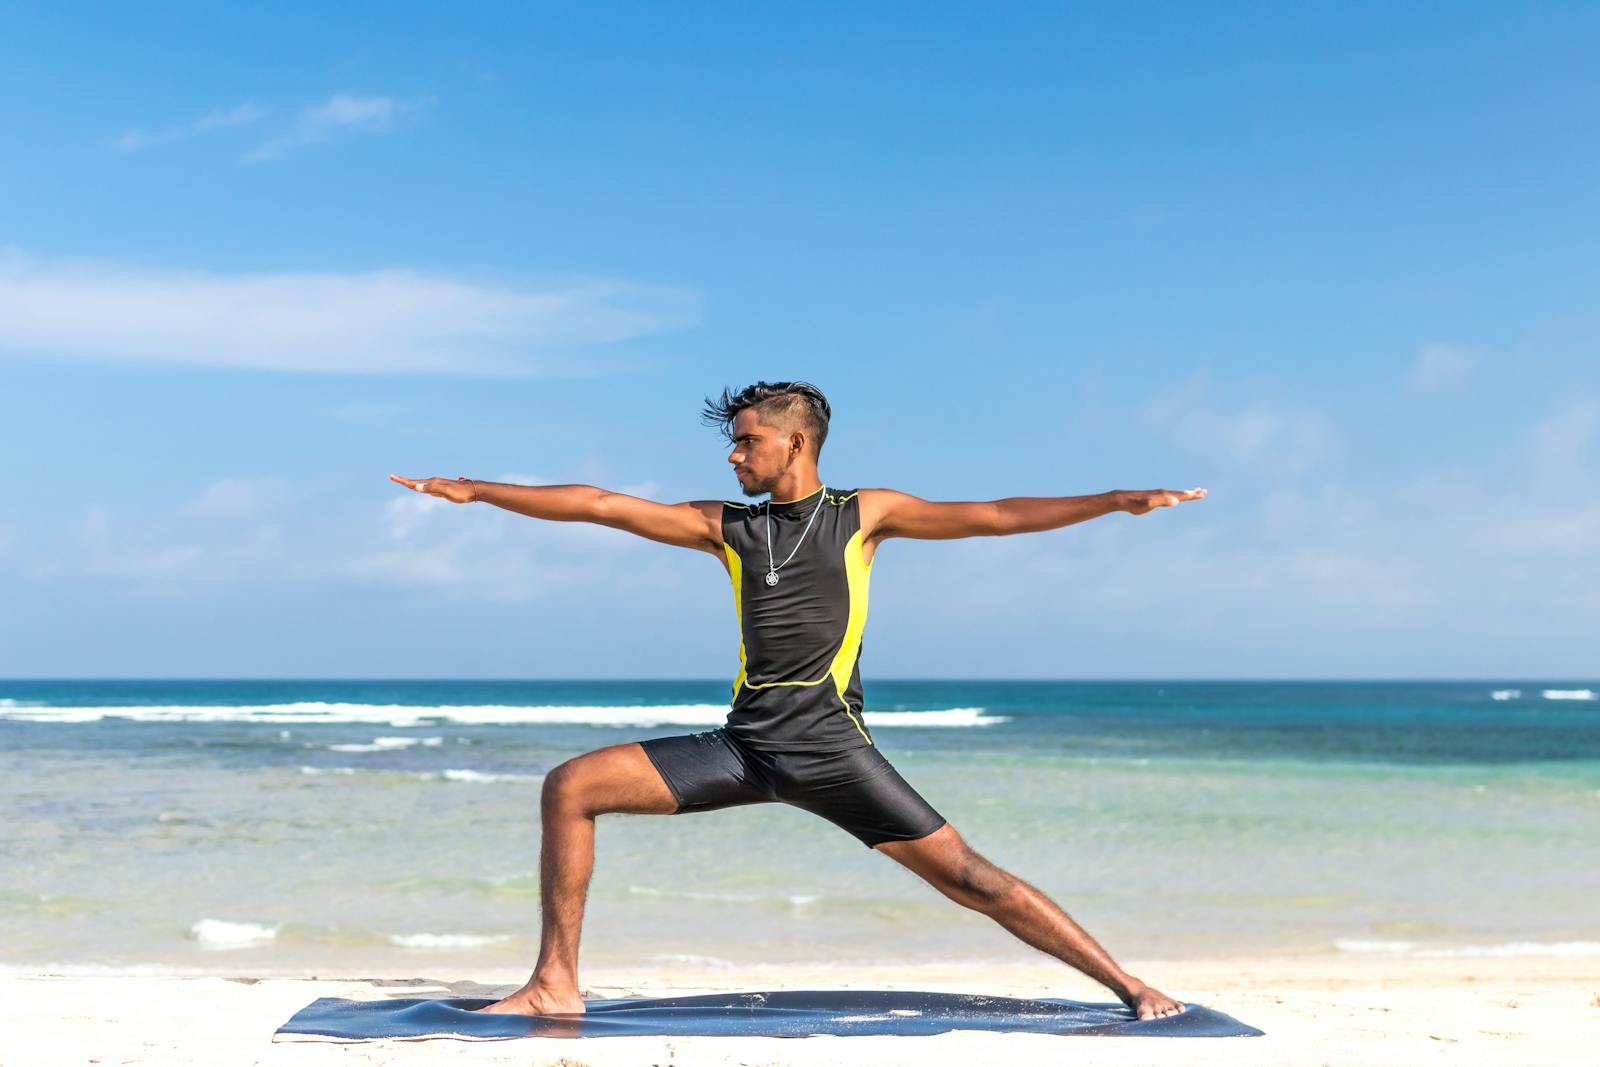 Man stretching on the beach in a wetsuit.